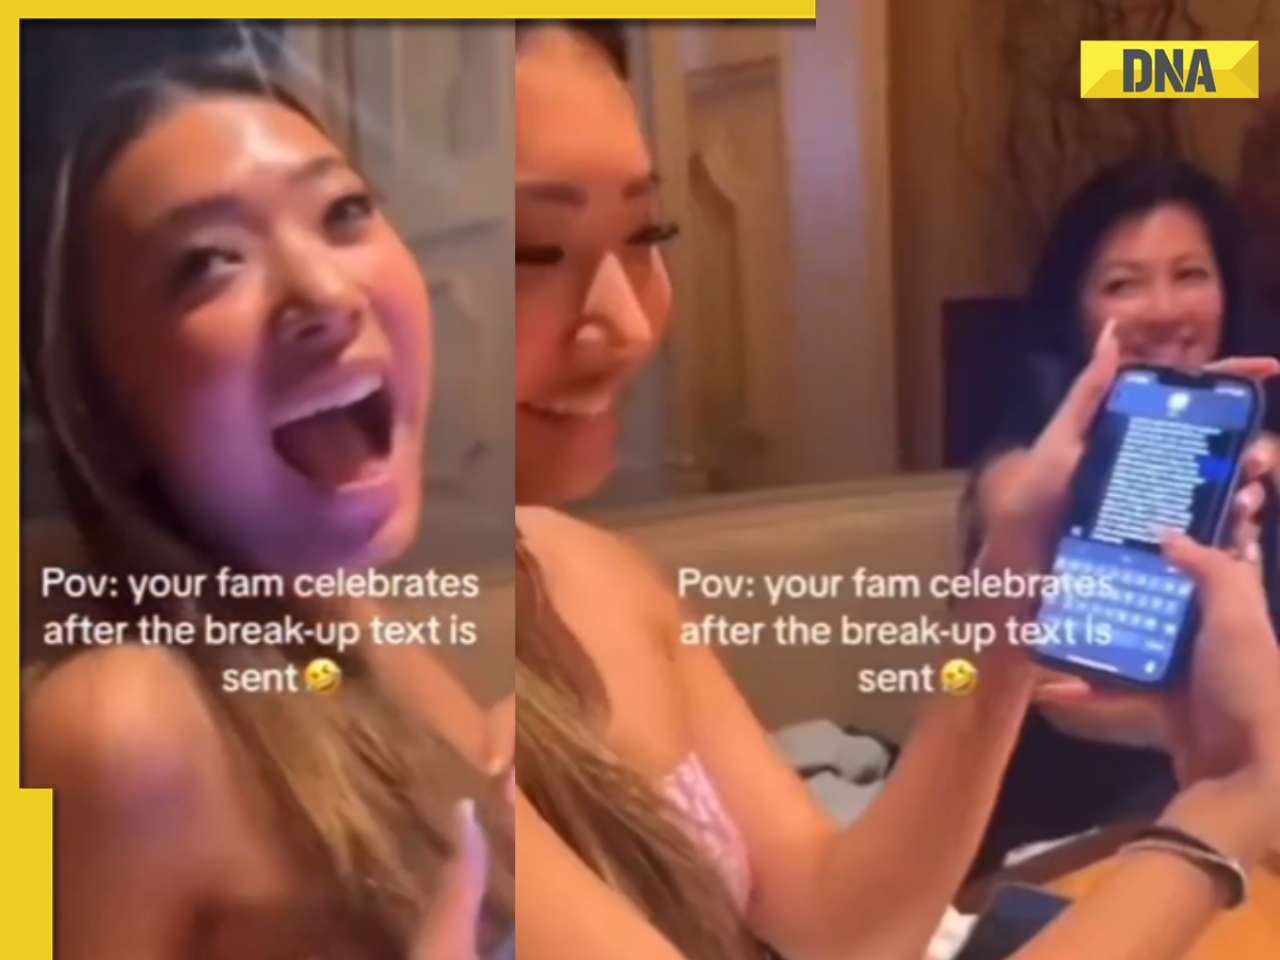 Family applauds and cheers as woman sends breakup text, viral video will make you laugh